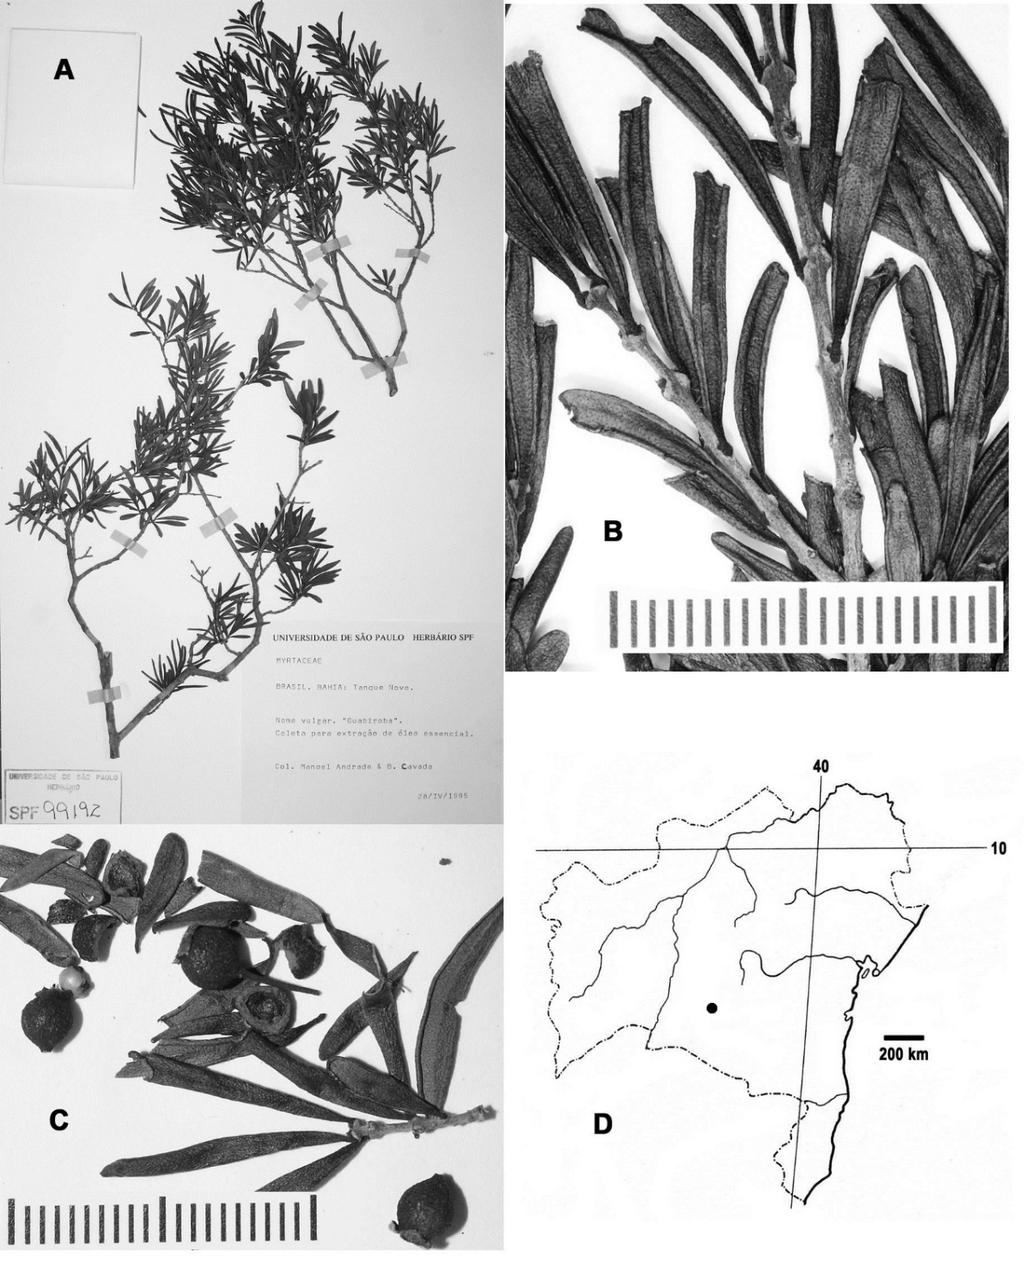 94 CANOTIA VOL. 13 2017 Fig. 30. Psidium sp. A. A. Herbarium sheet. B. Close-up of leaves and twigs showing swollen nodes and revolute leaf margins. C. Close-up of leaves, immature fruits, and one seed just above and to right of fruit on right side of image.